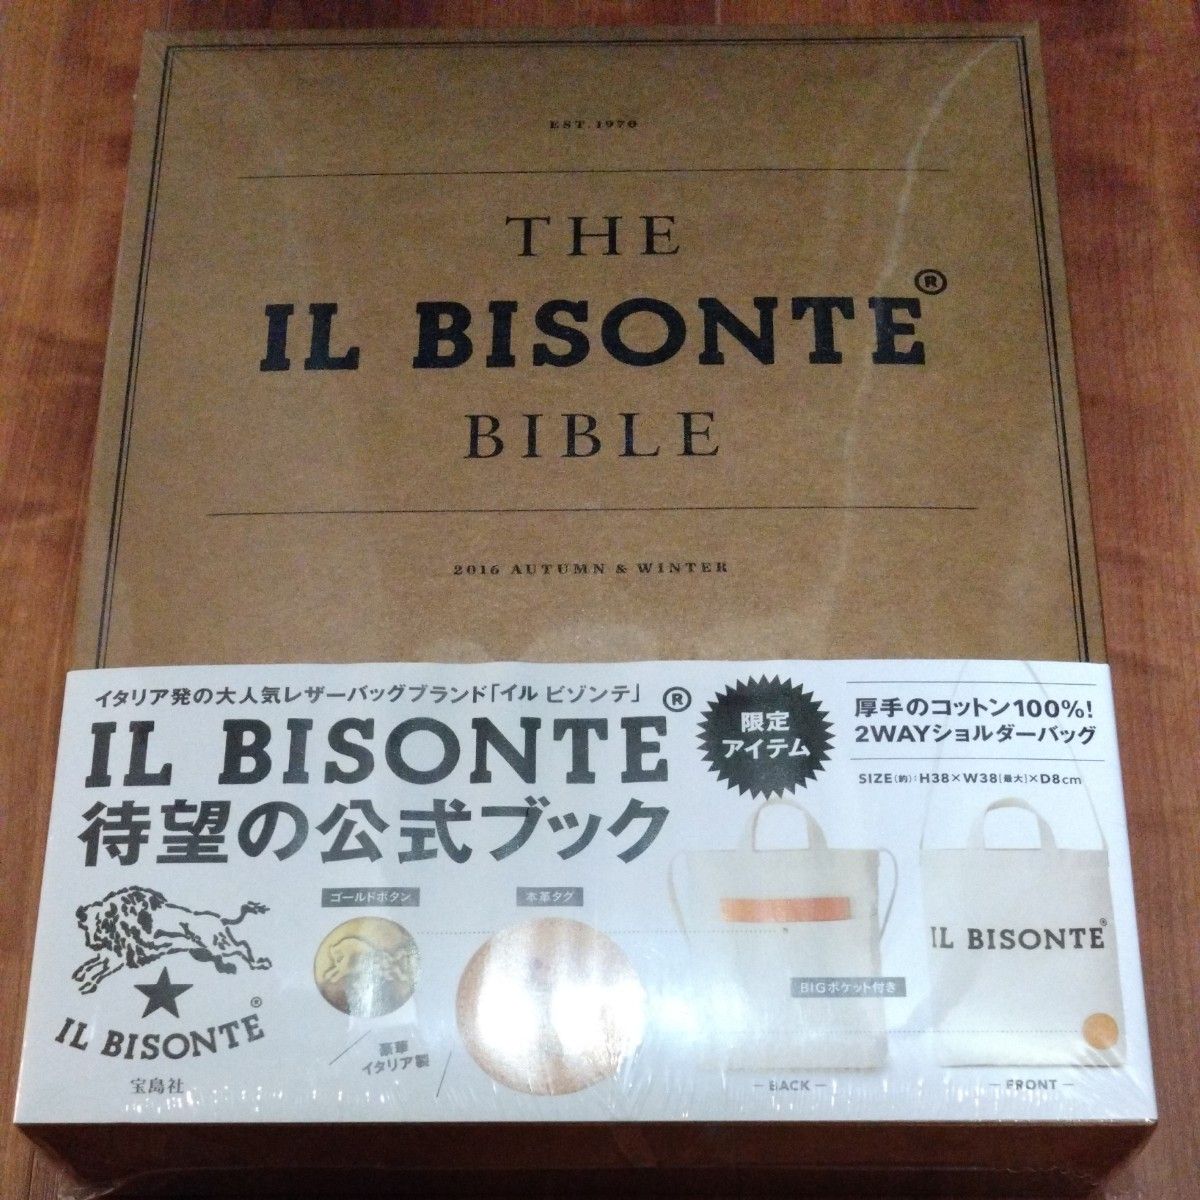 THE IL BISONTE BIBLE (バラエティ) イルビゾンテ IL BISONTE ムック本